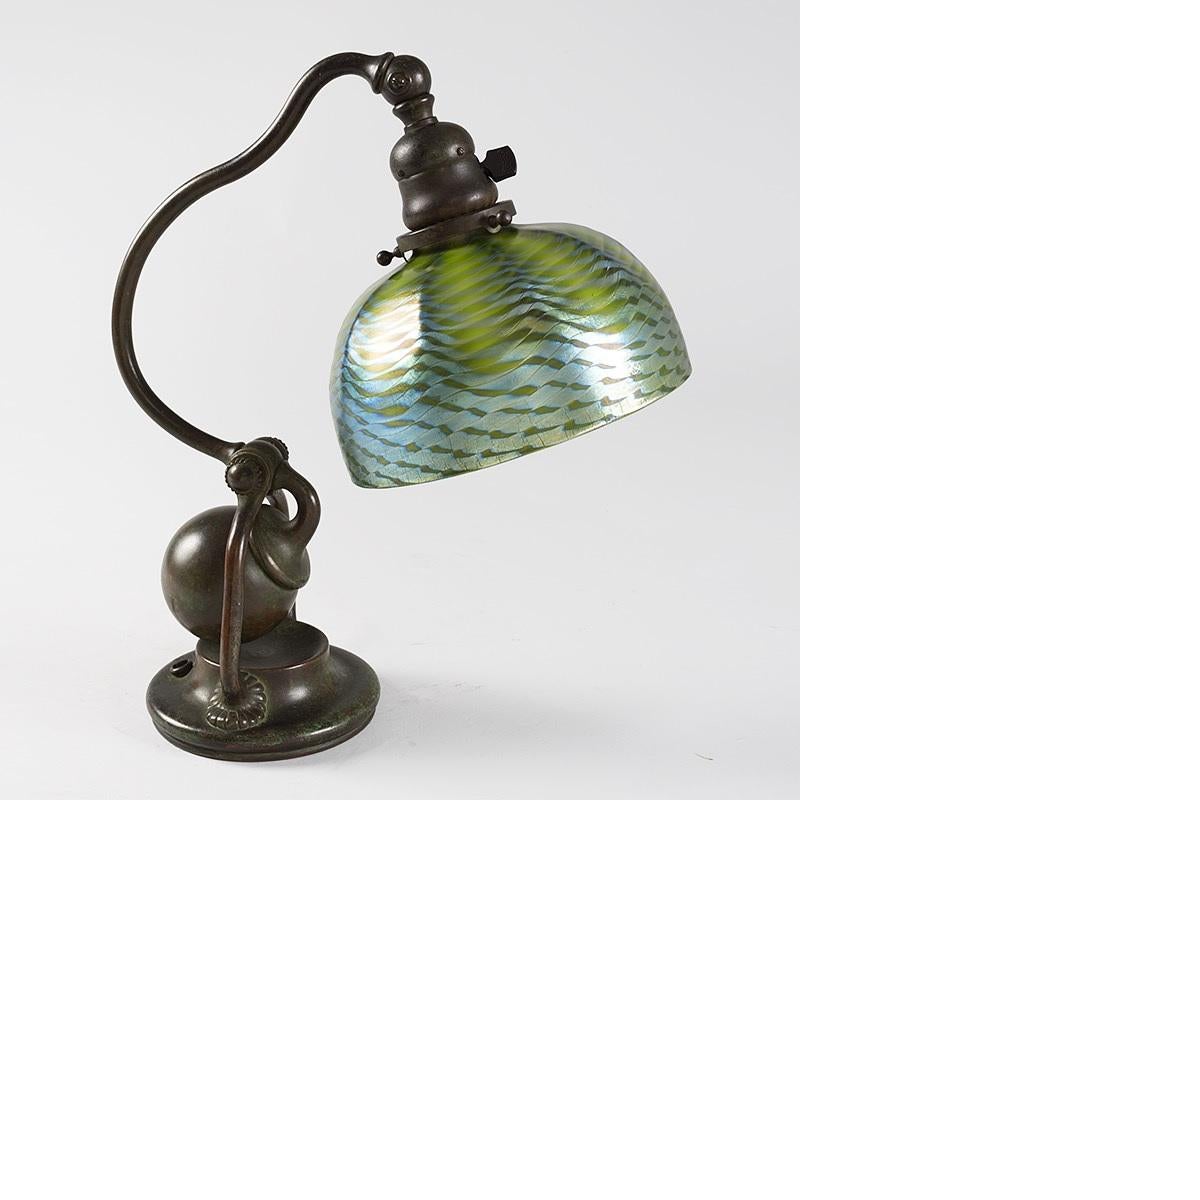 A Tiffany Studios New York glass and bronze “Counter Balance” desk lamp, featuring a blue and green iridescent “Damascene” Favrile glass shade suspended from a patinated bronze base.  Circa 1900.

Pictured in ‘“Tiffany Lamps and Metalware, An